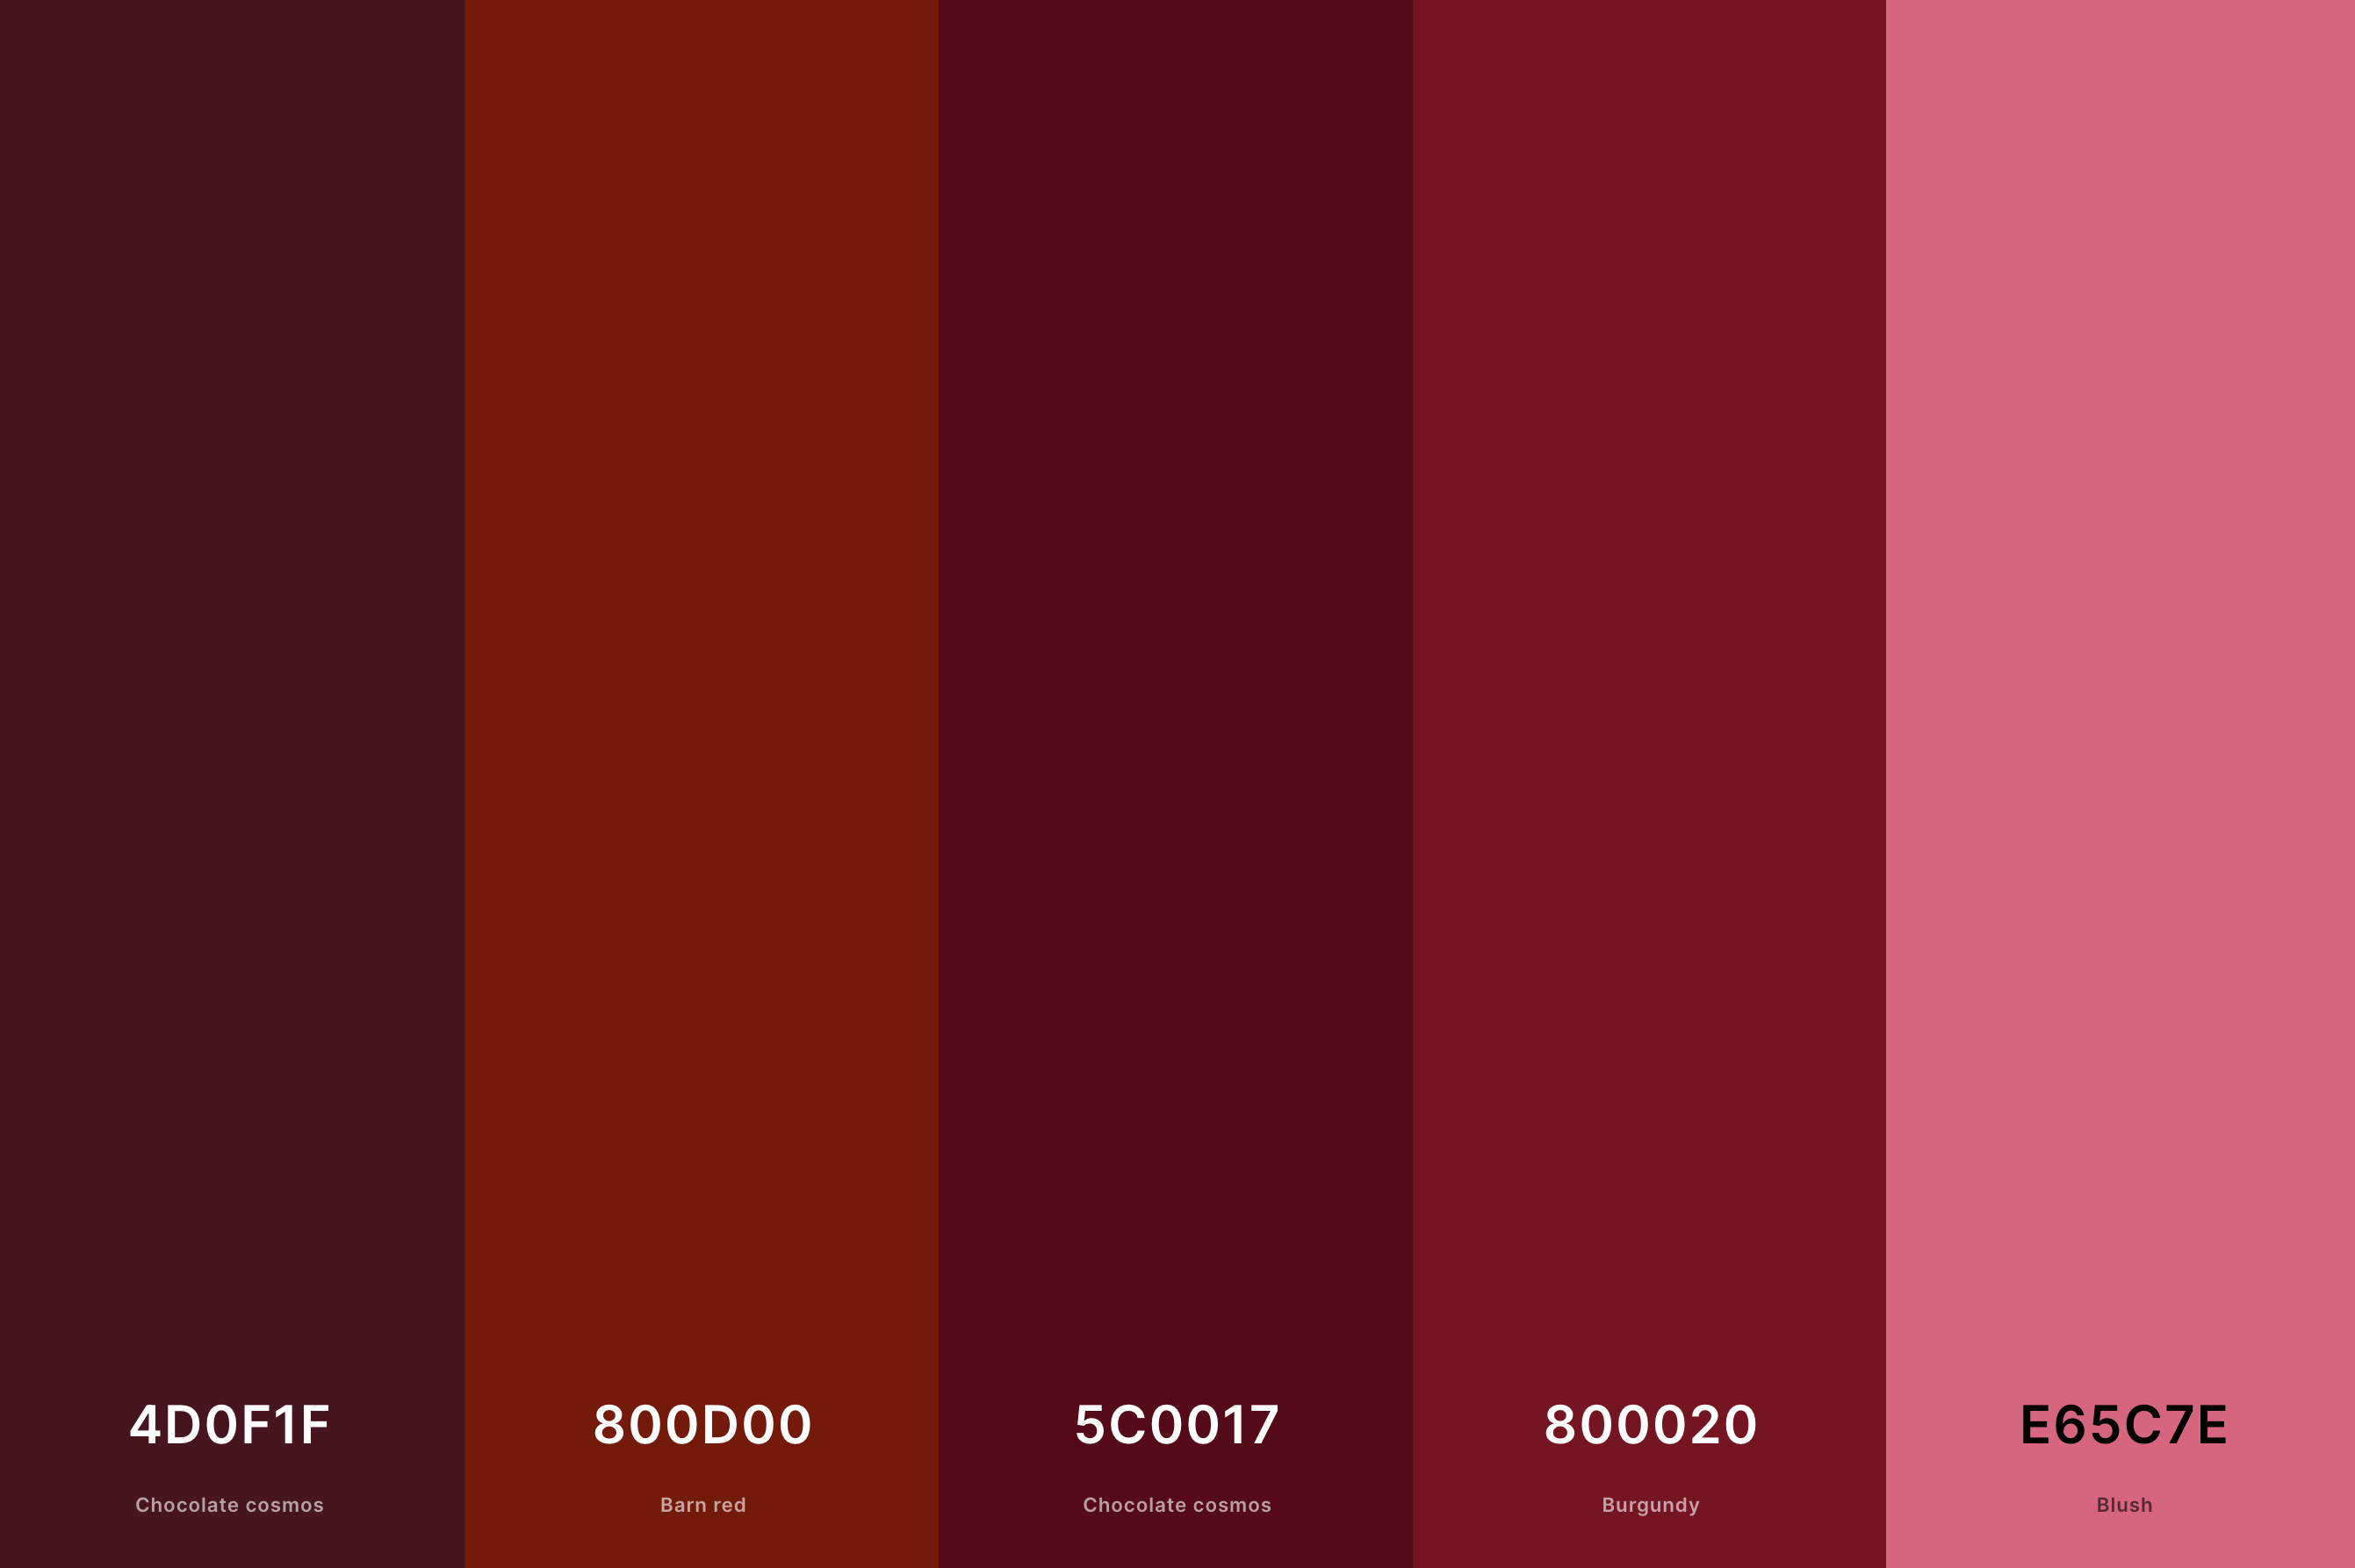 12. Terracotta And Burgundy Color Palette Color Palette with Chocolate Cosmos (Hex #4D0F1F) + Barn Red (Hex #800D00) + Chocolate Cosmos (Hex #5C0017) + Burgundy (Hex #800020) + Blush (Hex #E65C7E) Color Palette with Hex Codes